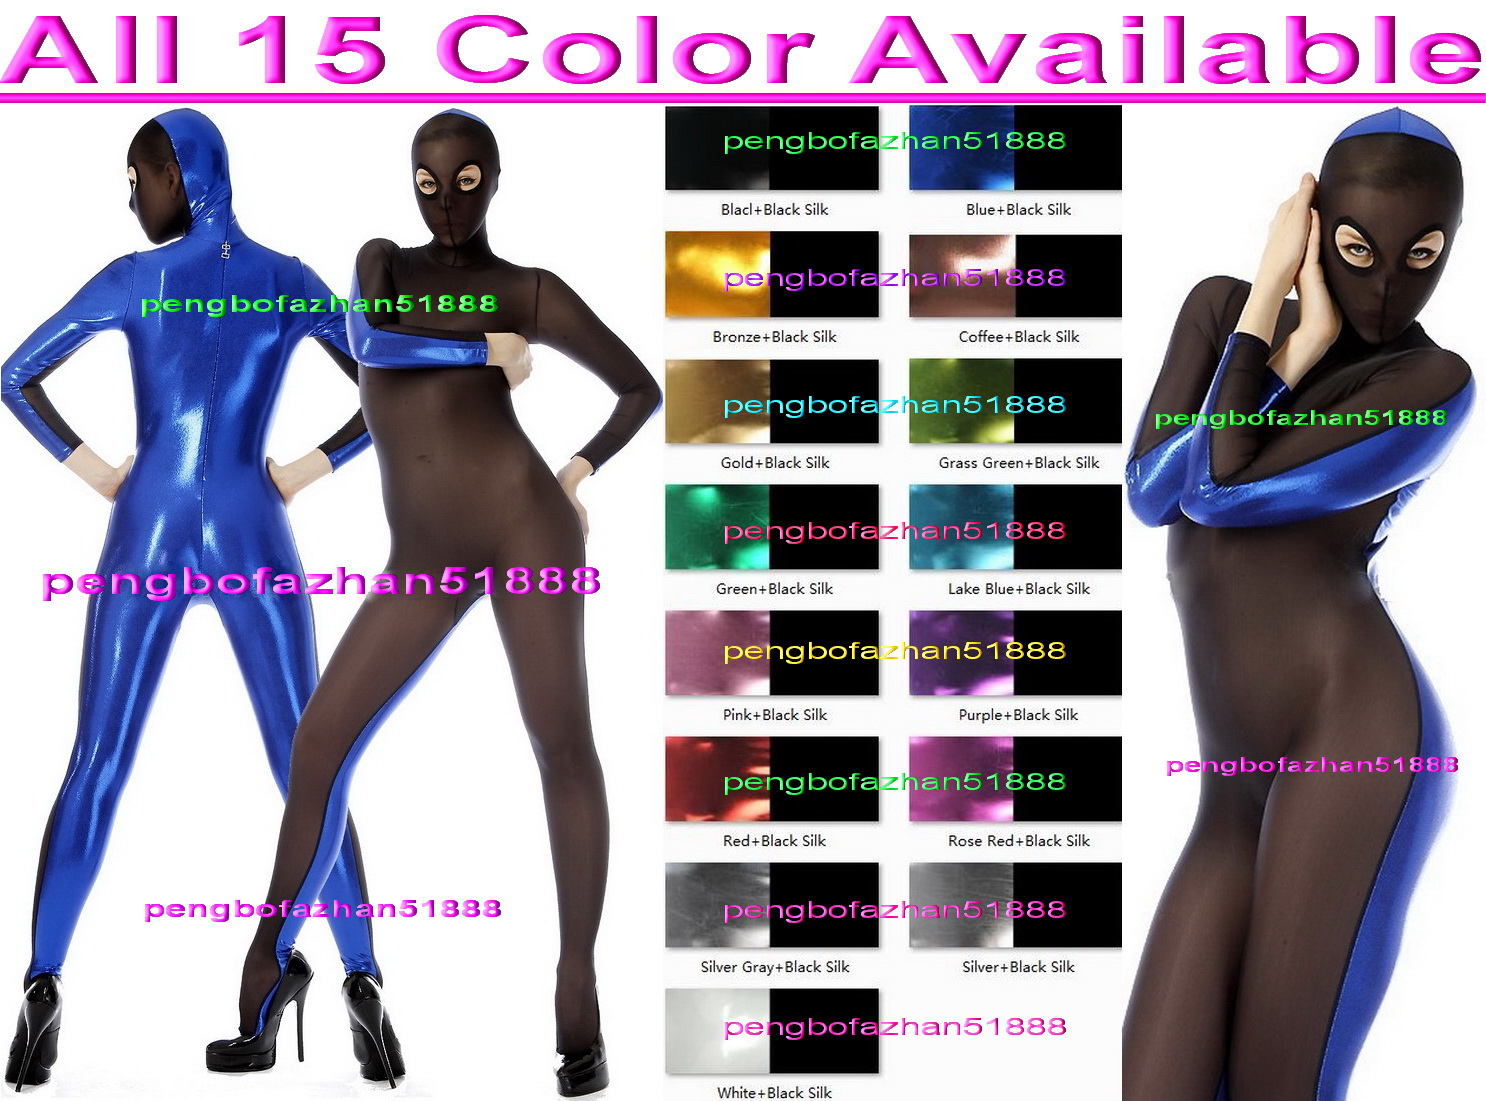 

Sexy Women Tights Body Suit Costumes Unisex 15 Color Shiny Metallic and Spandex Silk Catsuit Costume With Open Eyes Halloween Party Fancy Dress Cosplay Bodysuit P236, Pink+black silk